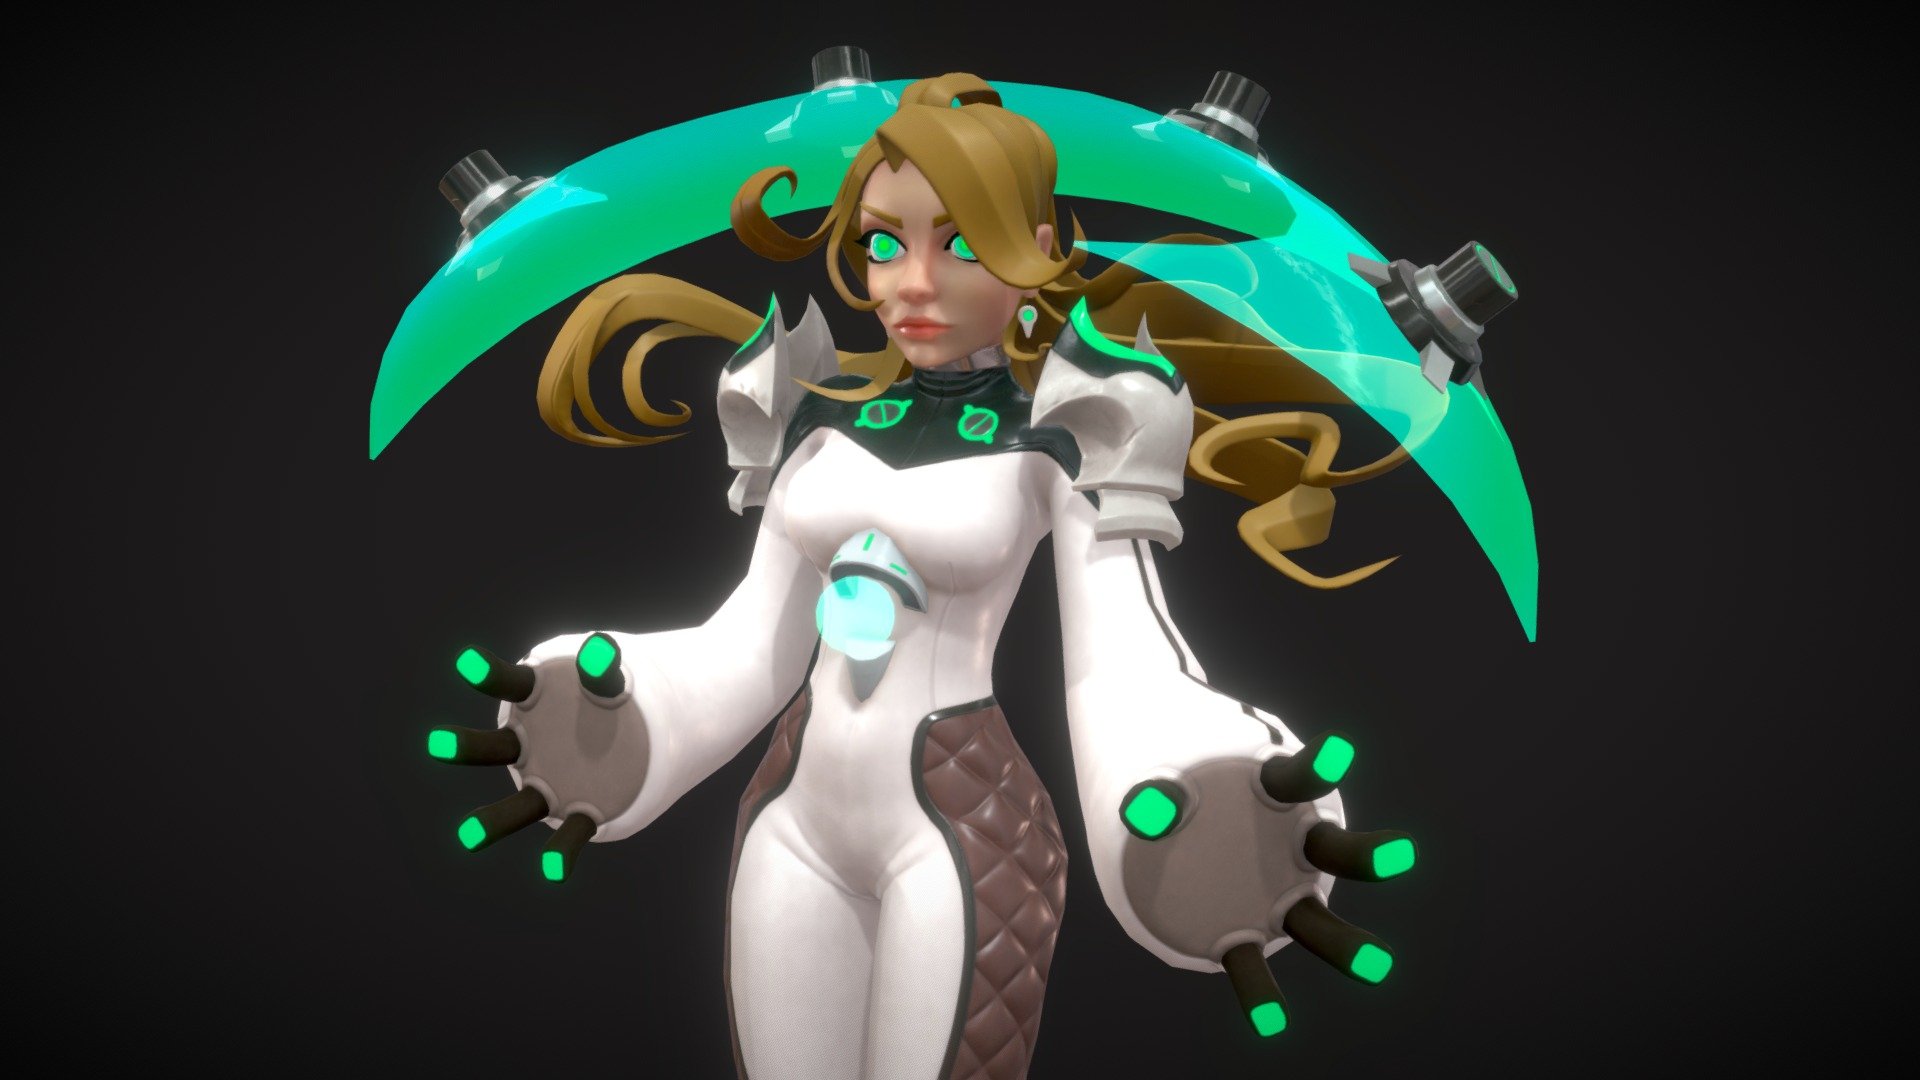 Personal project “Space Girl”
This Space Girl, who seems to be from the future, has sworn to protect everyone with her powerful energy shield.

It still seemed to be pretty close to the original concept, even if I had to make a few minor changes because I wanted to model this character as a game model and animate it.

Modeled in Maya, sculpted and rendered in Blender and textured in Substance Painter.

View full project on Artstastion https://www.artstation.com/artwork/49bWa8 - Space Girl - 3D model by Atilay 3d model